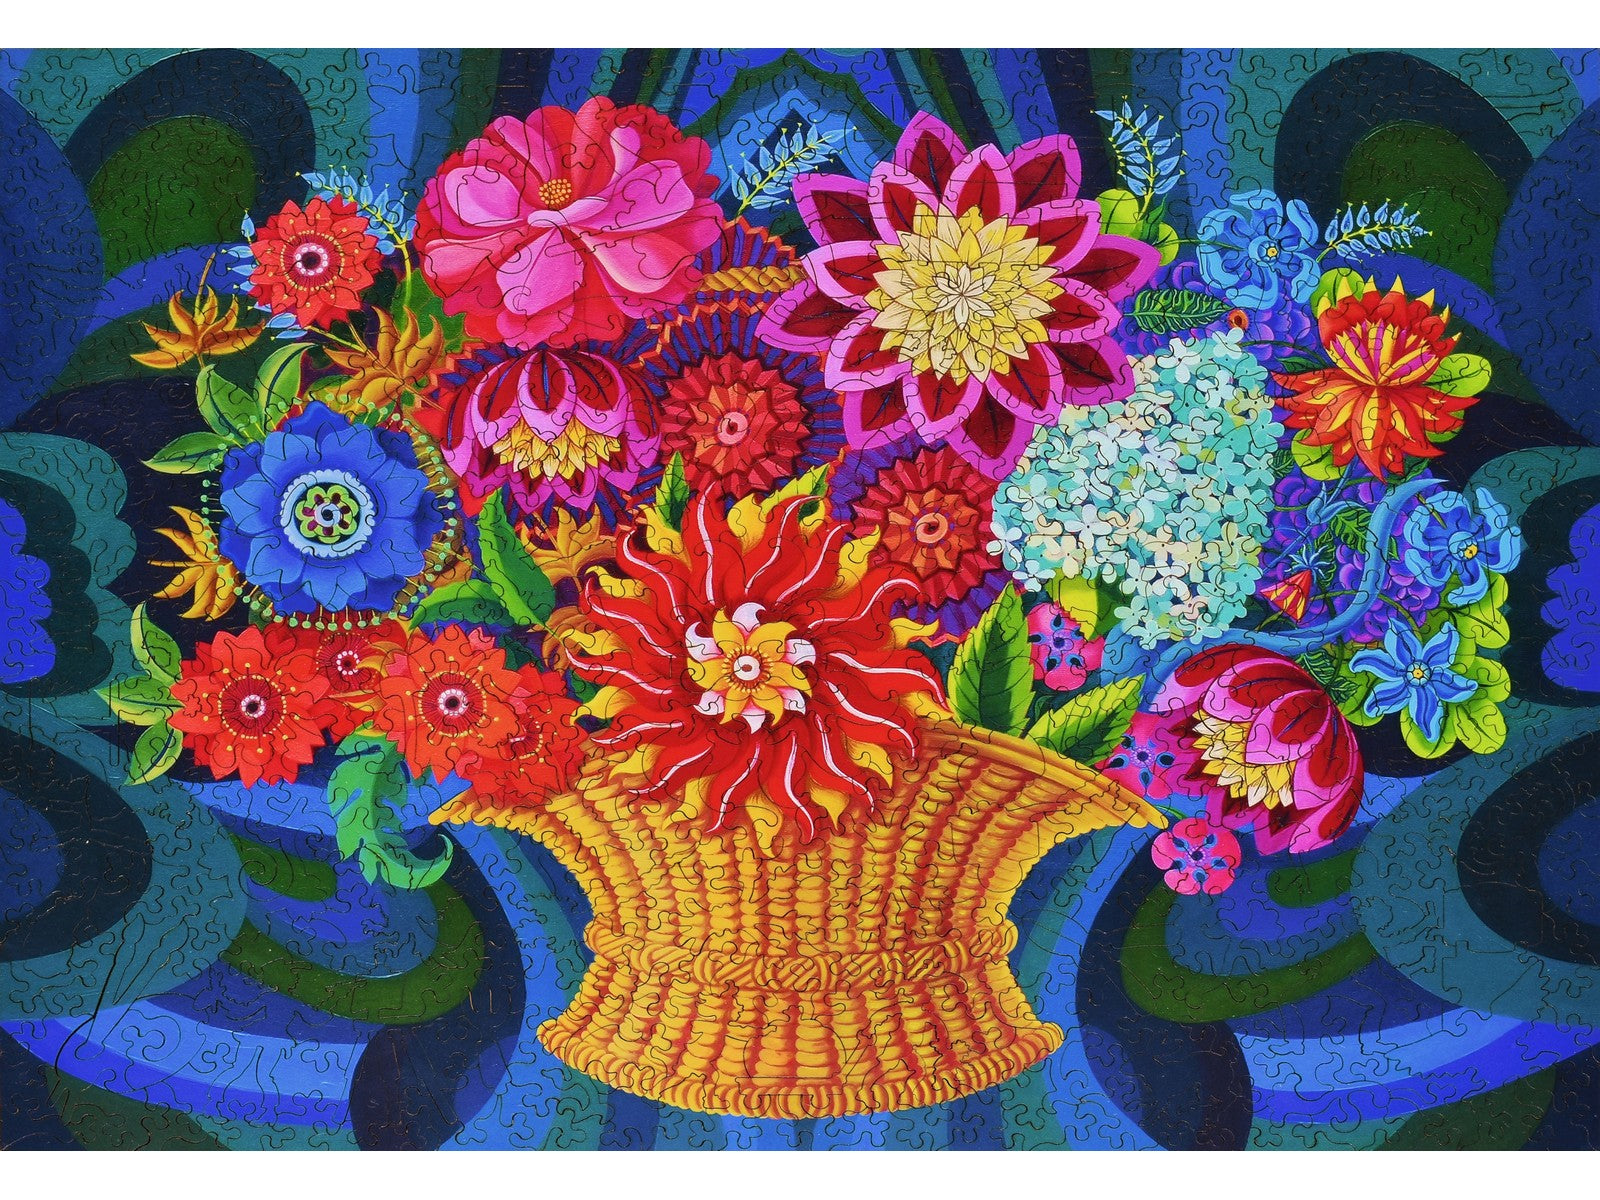 The front of the puzzle, More Blooms in a Basket, which shows a bouquet of flowers in a basket.